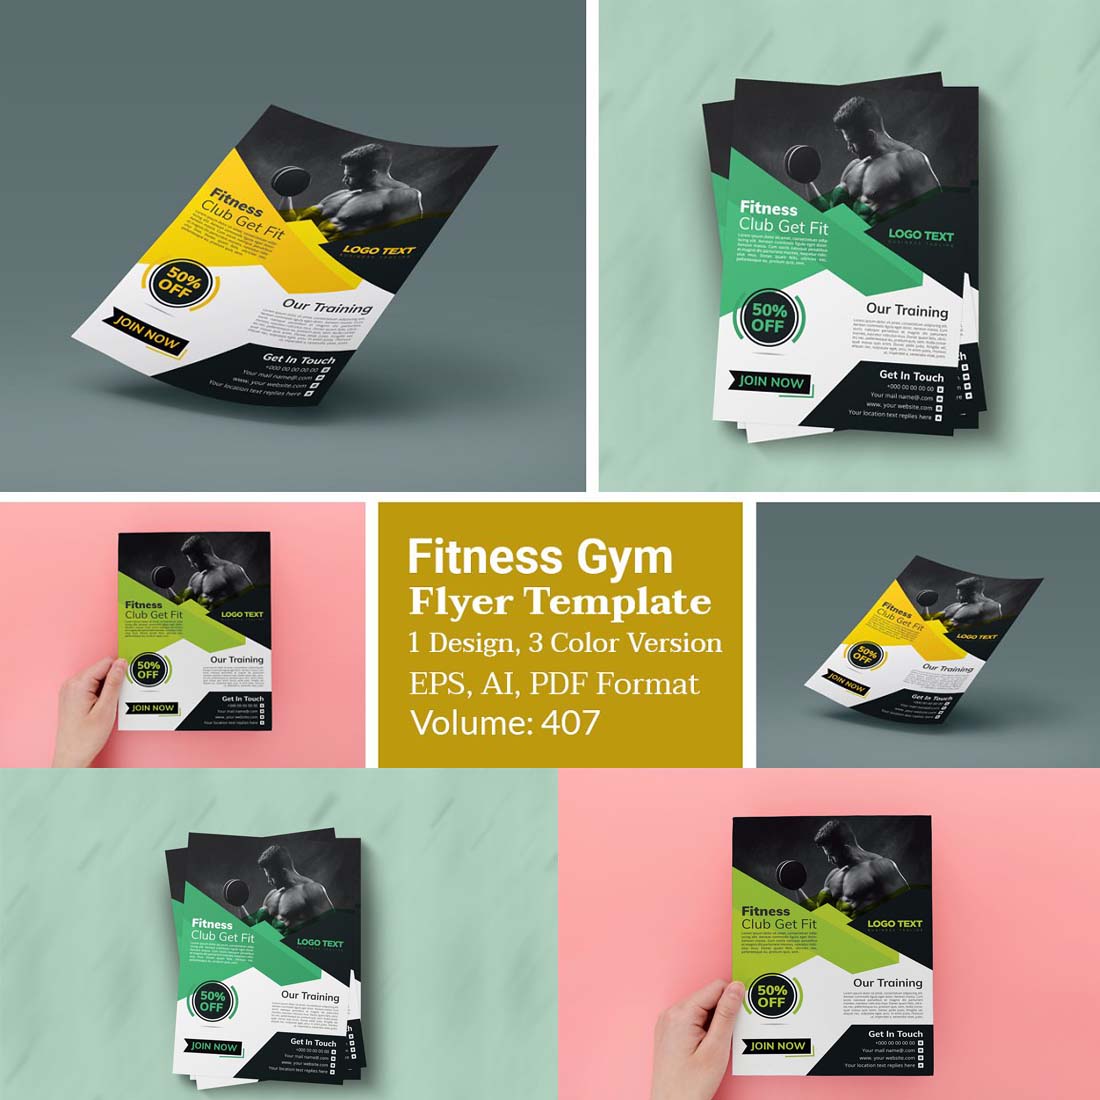 Fitness Gym Flyer Templates cover image.